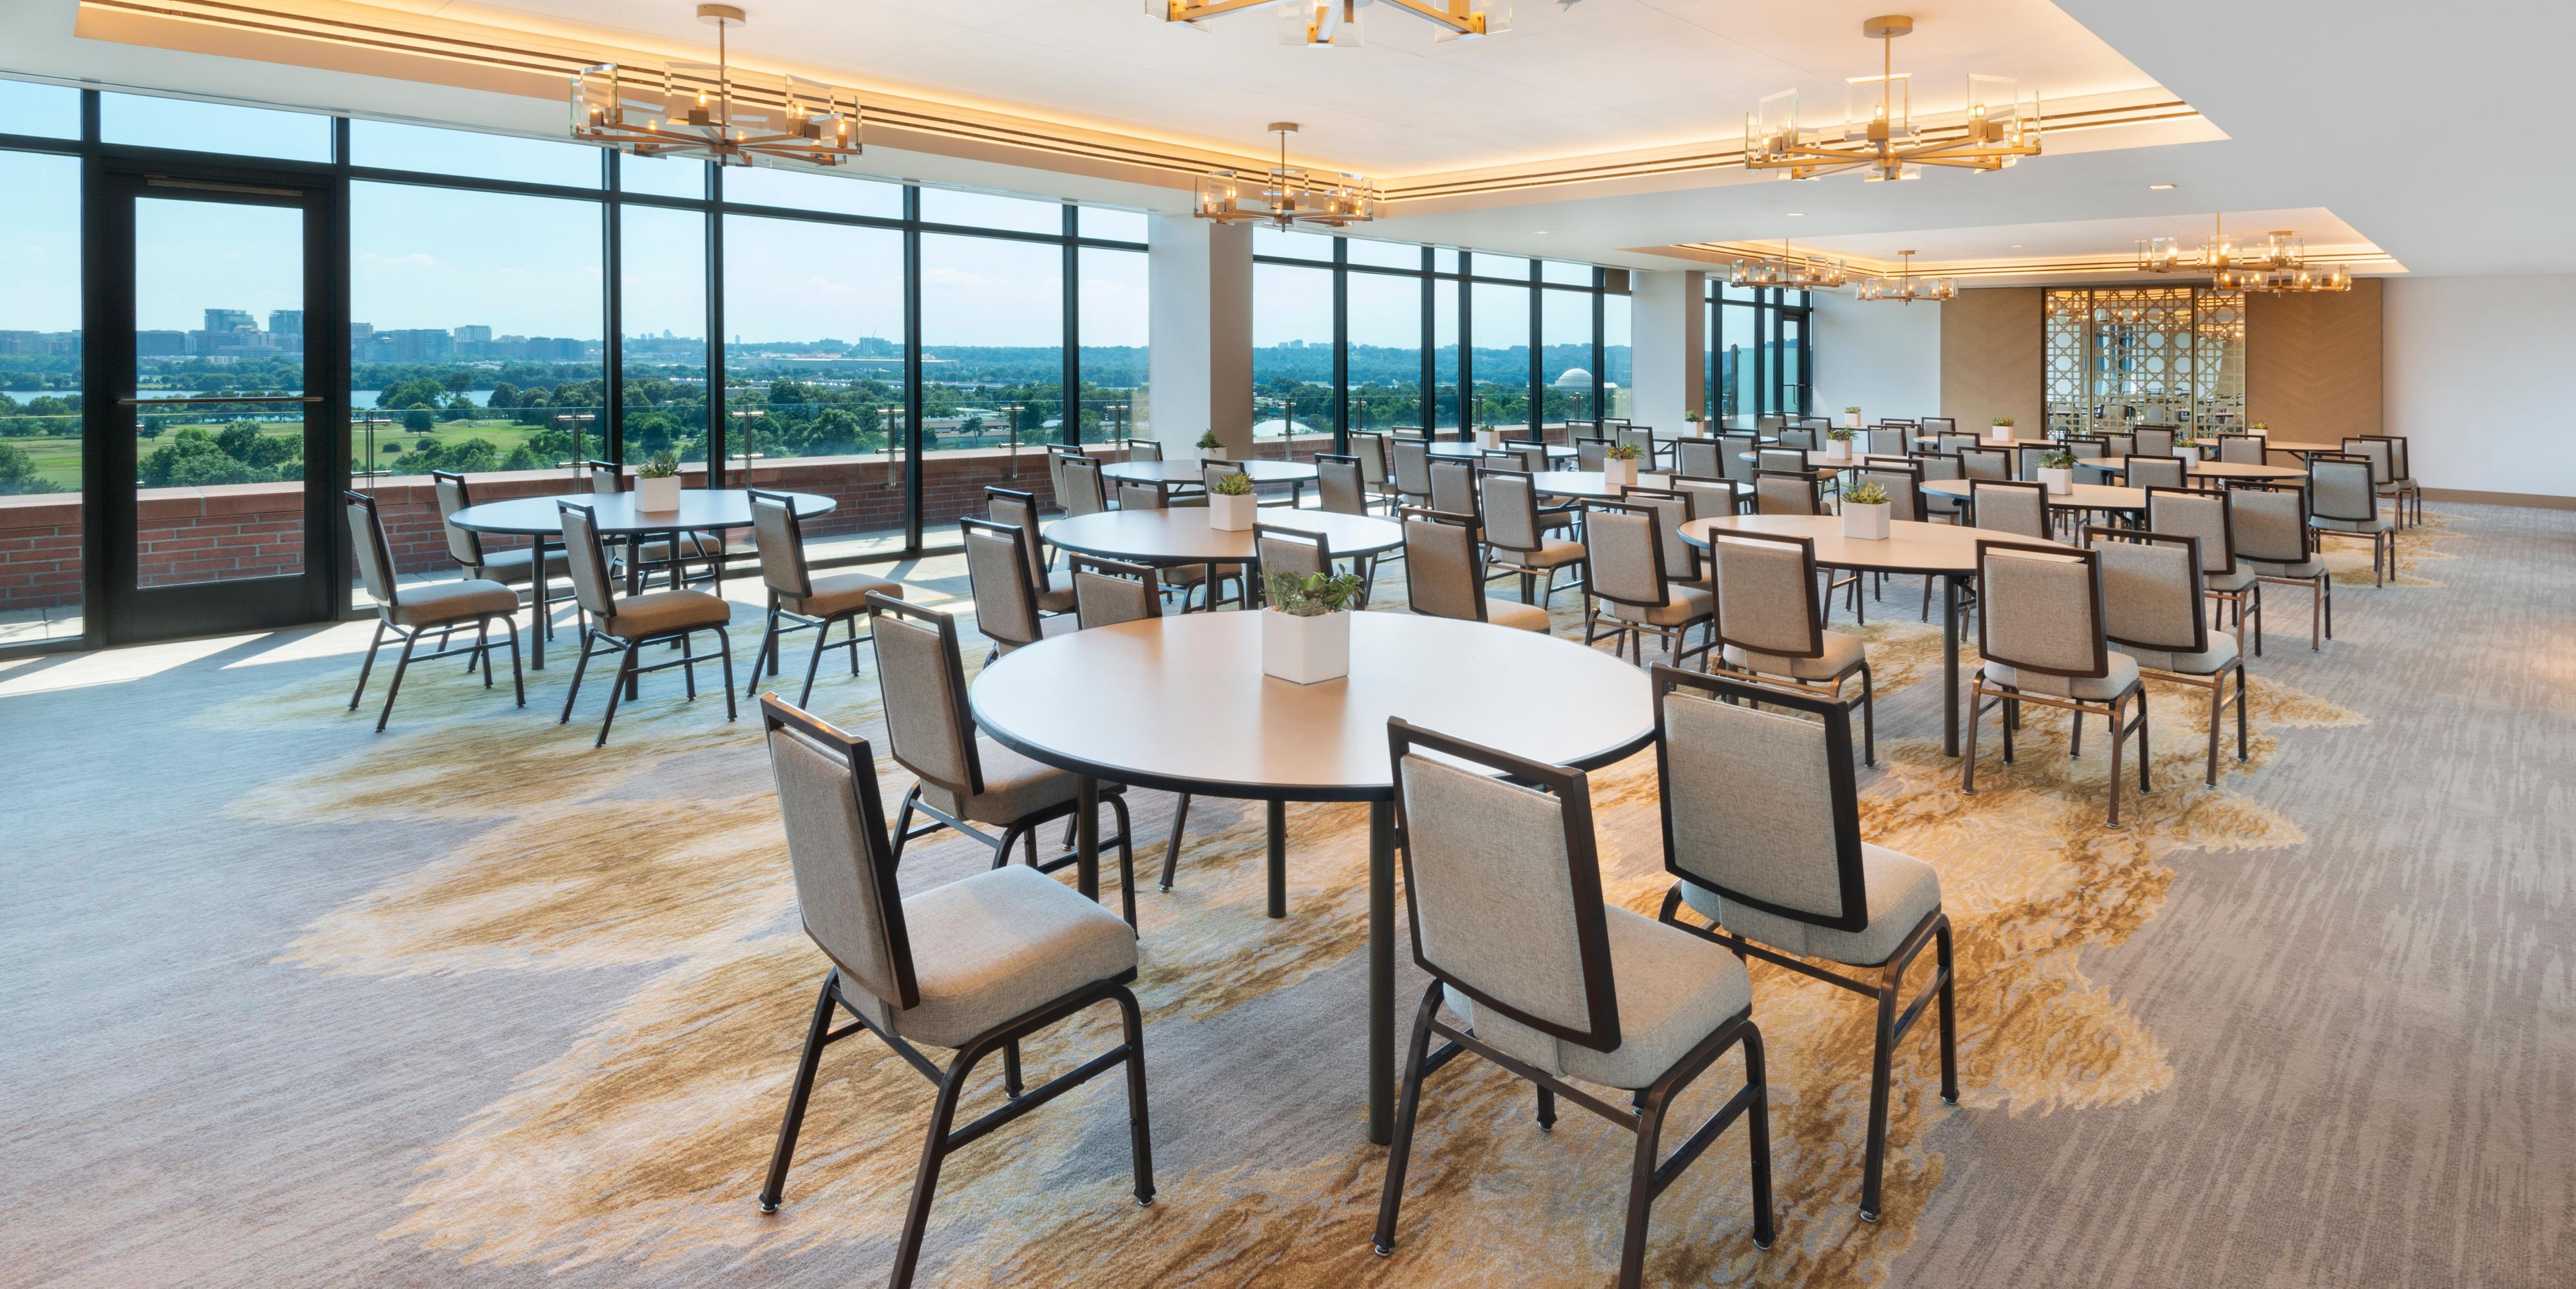 We will let you do the talking while our dedicated teams and culinary experts work to customize your event.  From waterside cocktail parties, to theater-style seating for 700, we can accommodate your guests and ensure a successful meeting. 